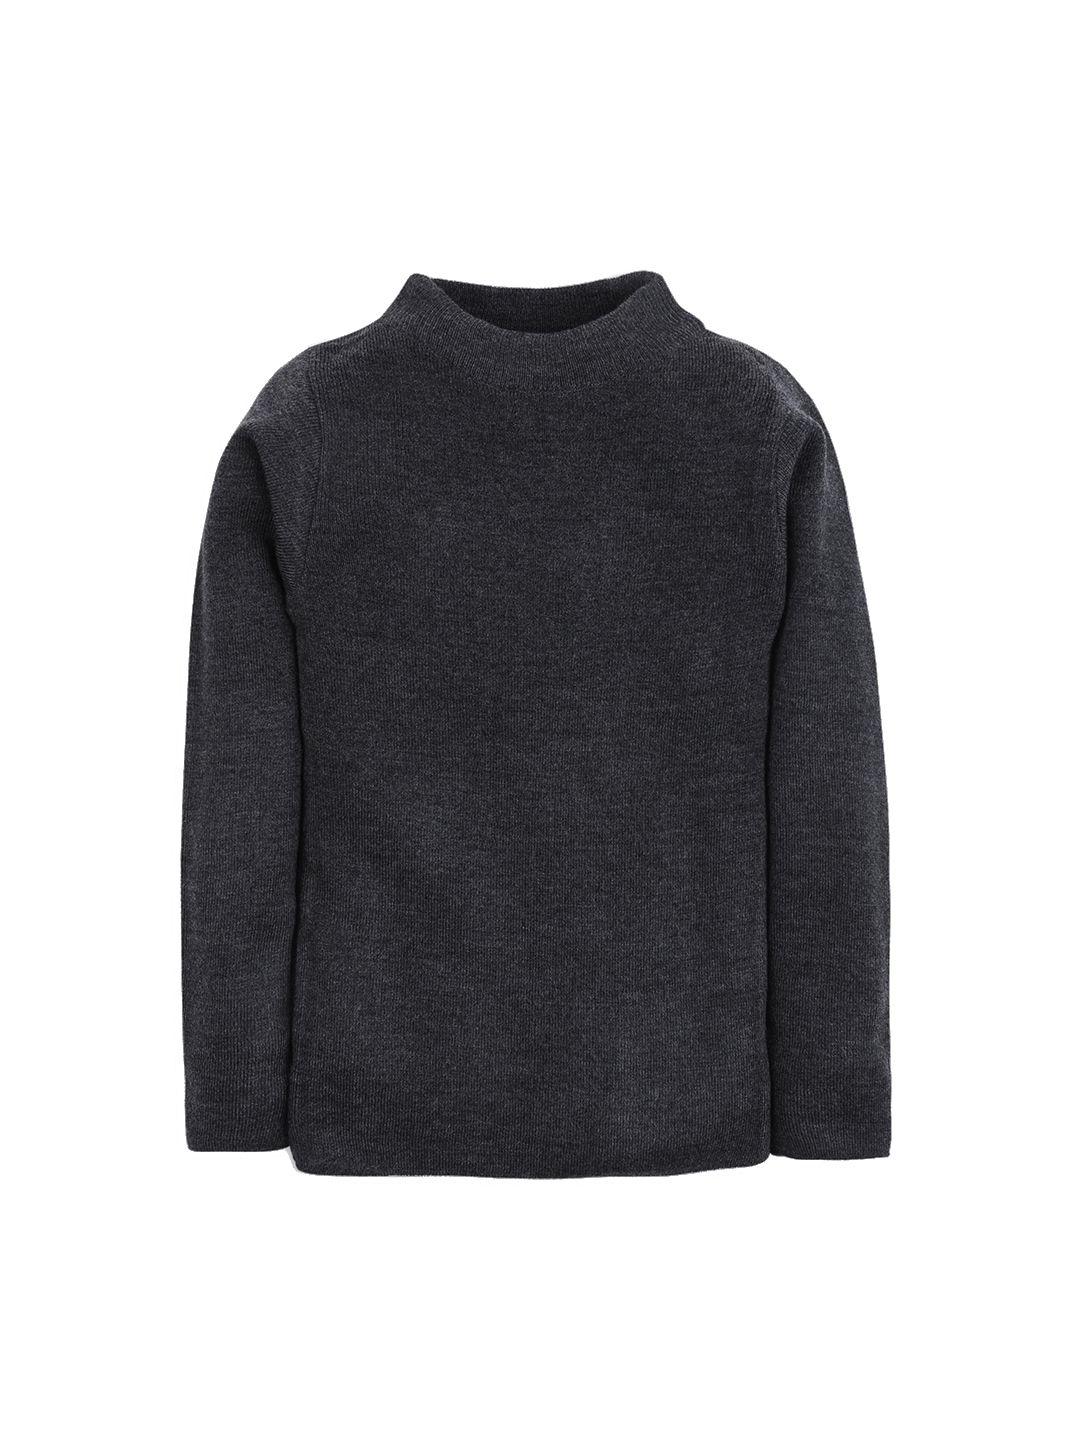 rvk unisex charcoal grey solid sweater